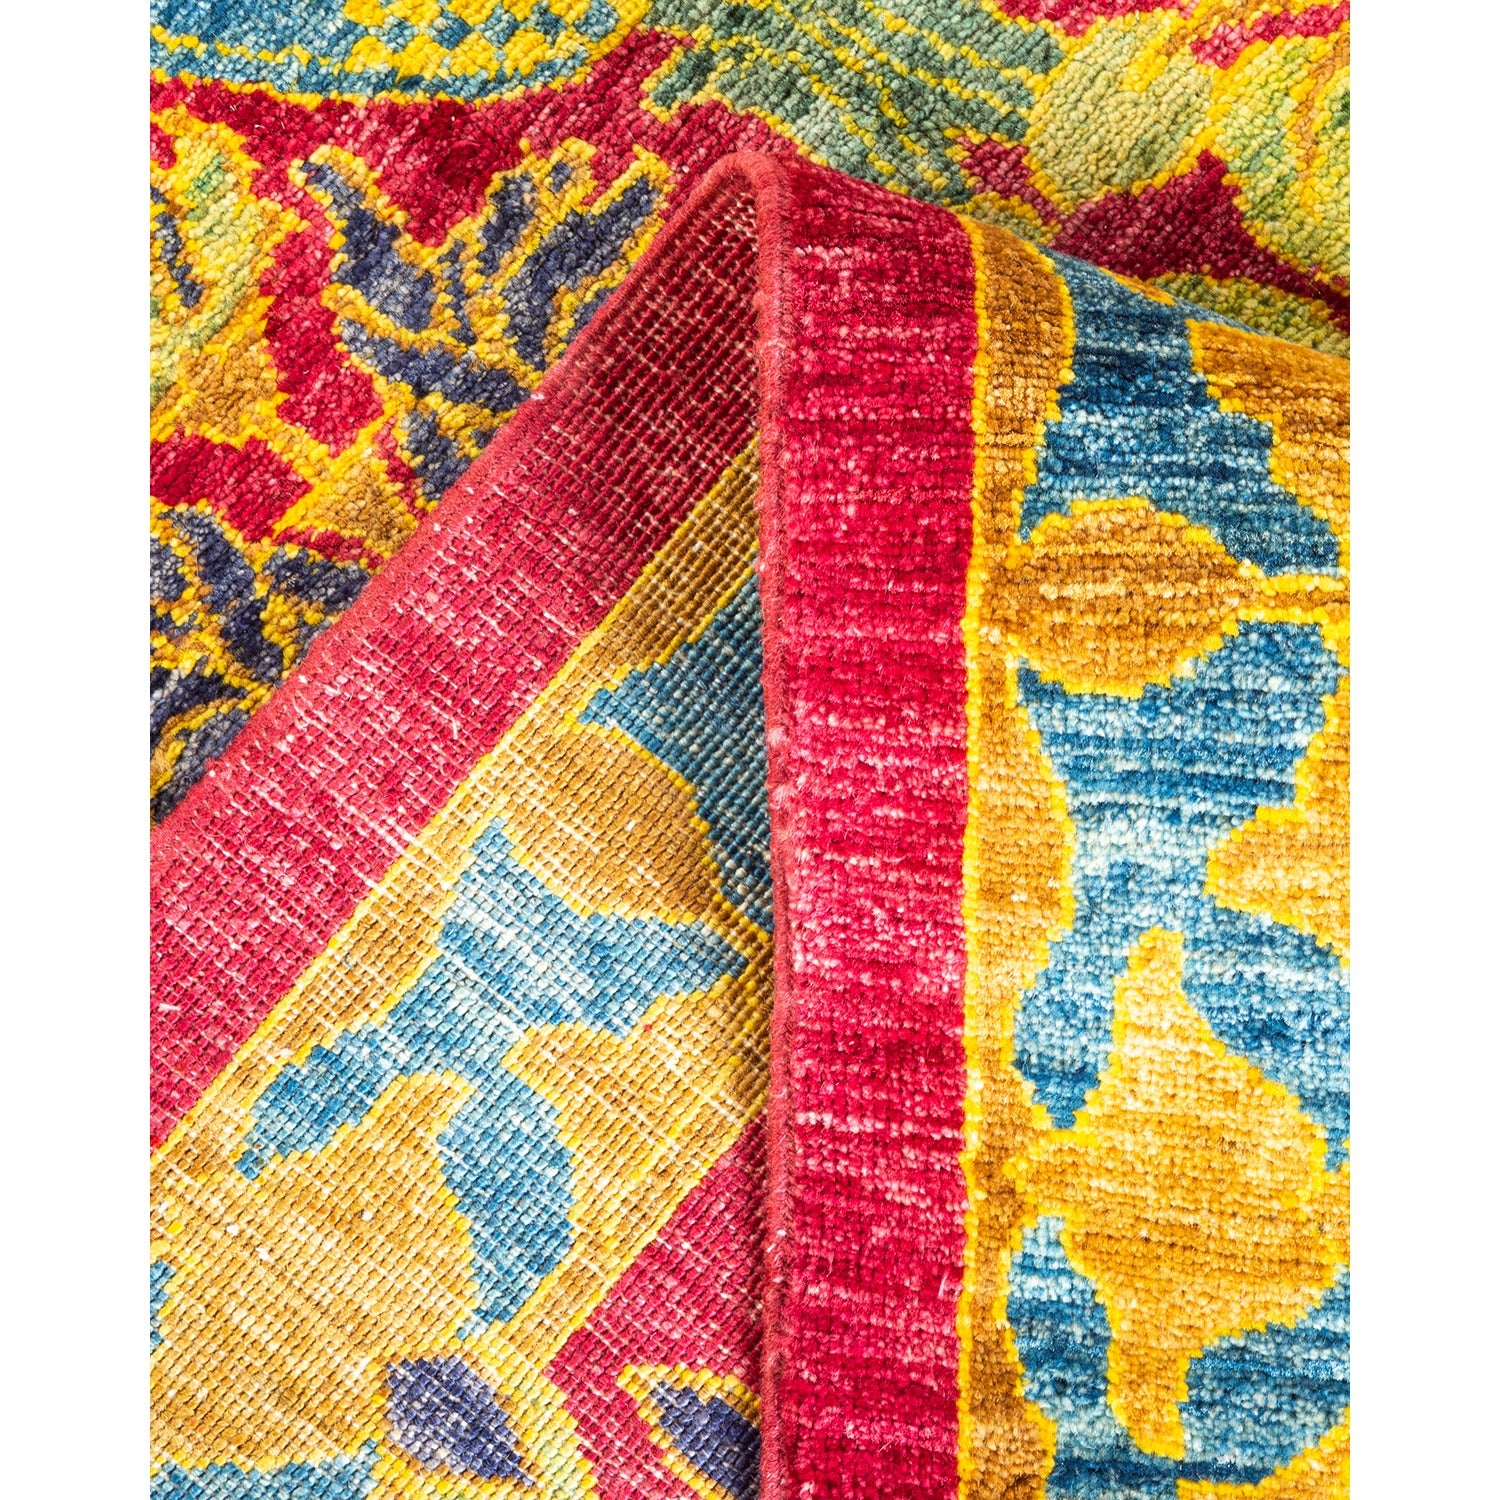 Vibrant and intricate woven rug showcases bold colors and texture.